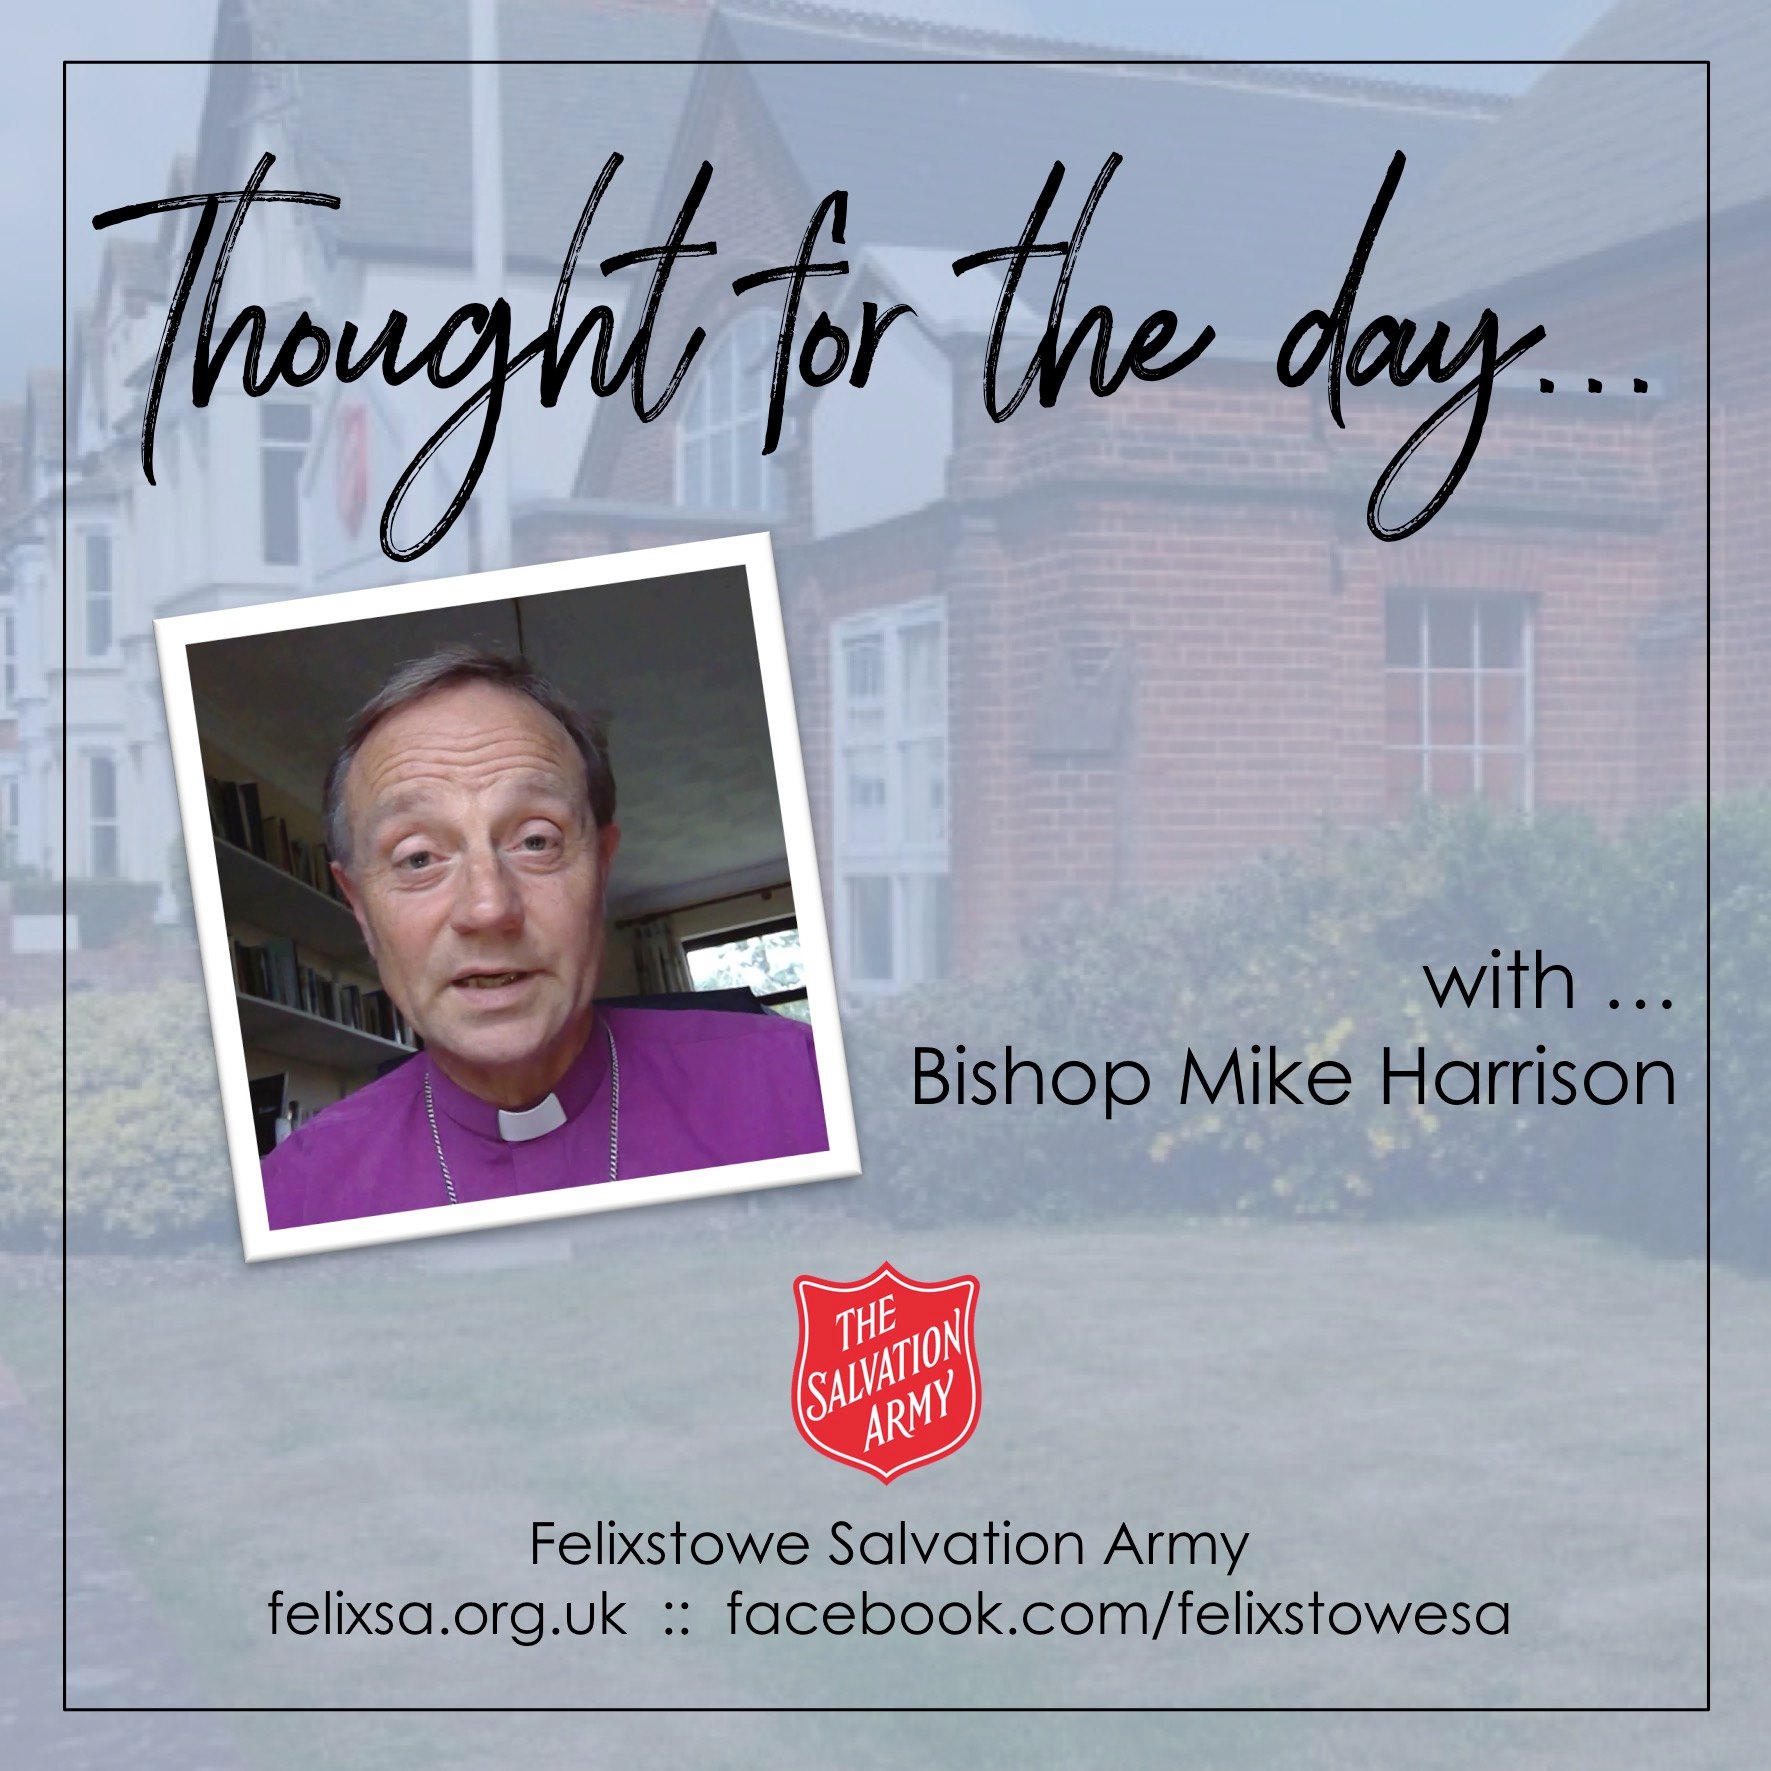 Thought for the Day with Bishop Mike Harrison (Bishop of Dunwich)